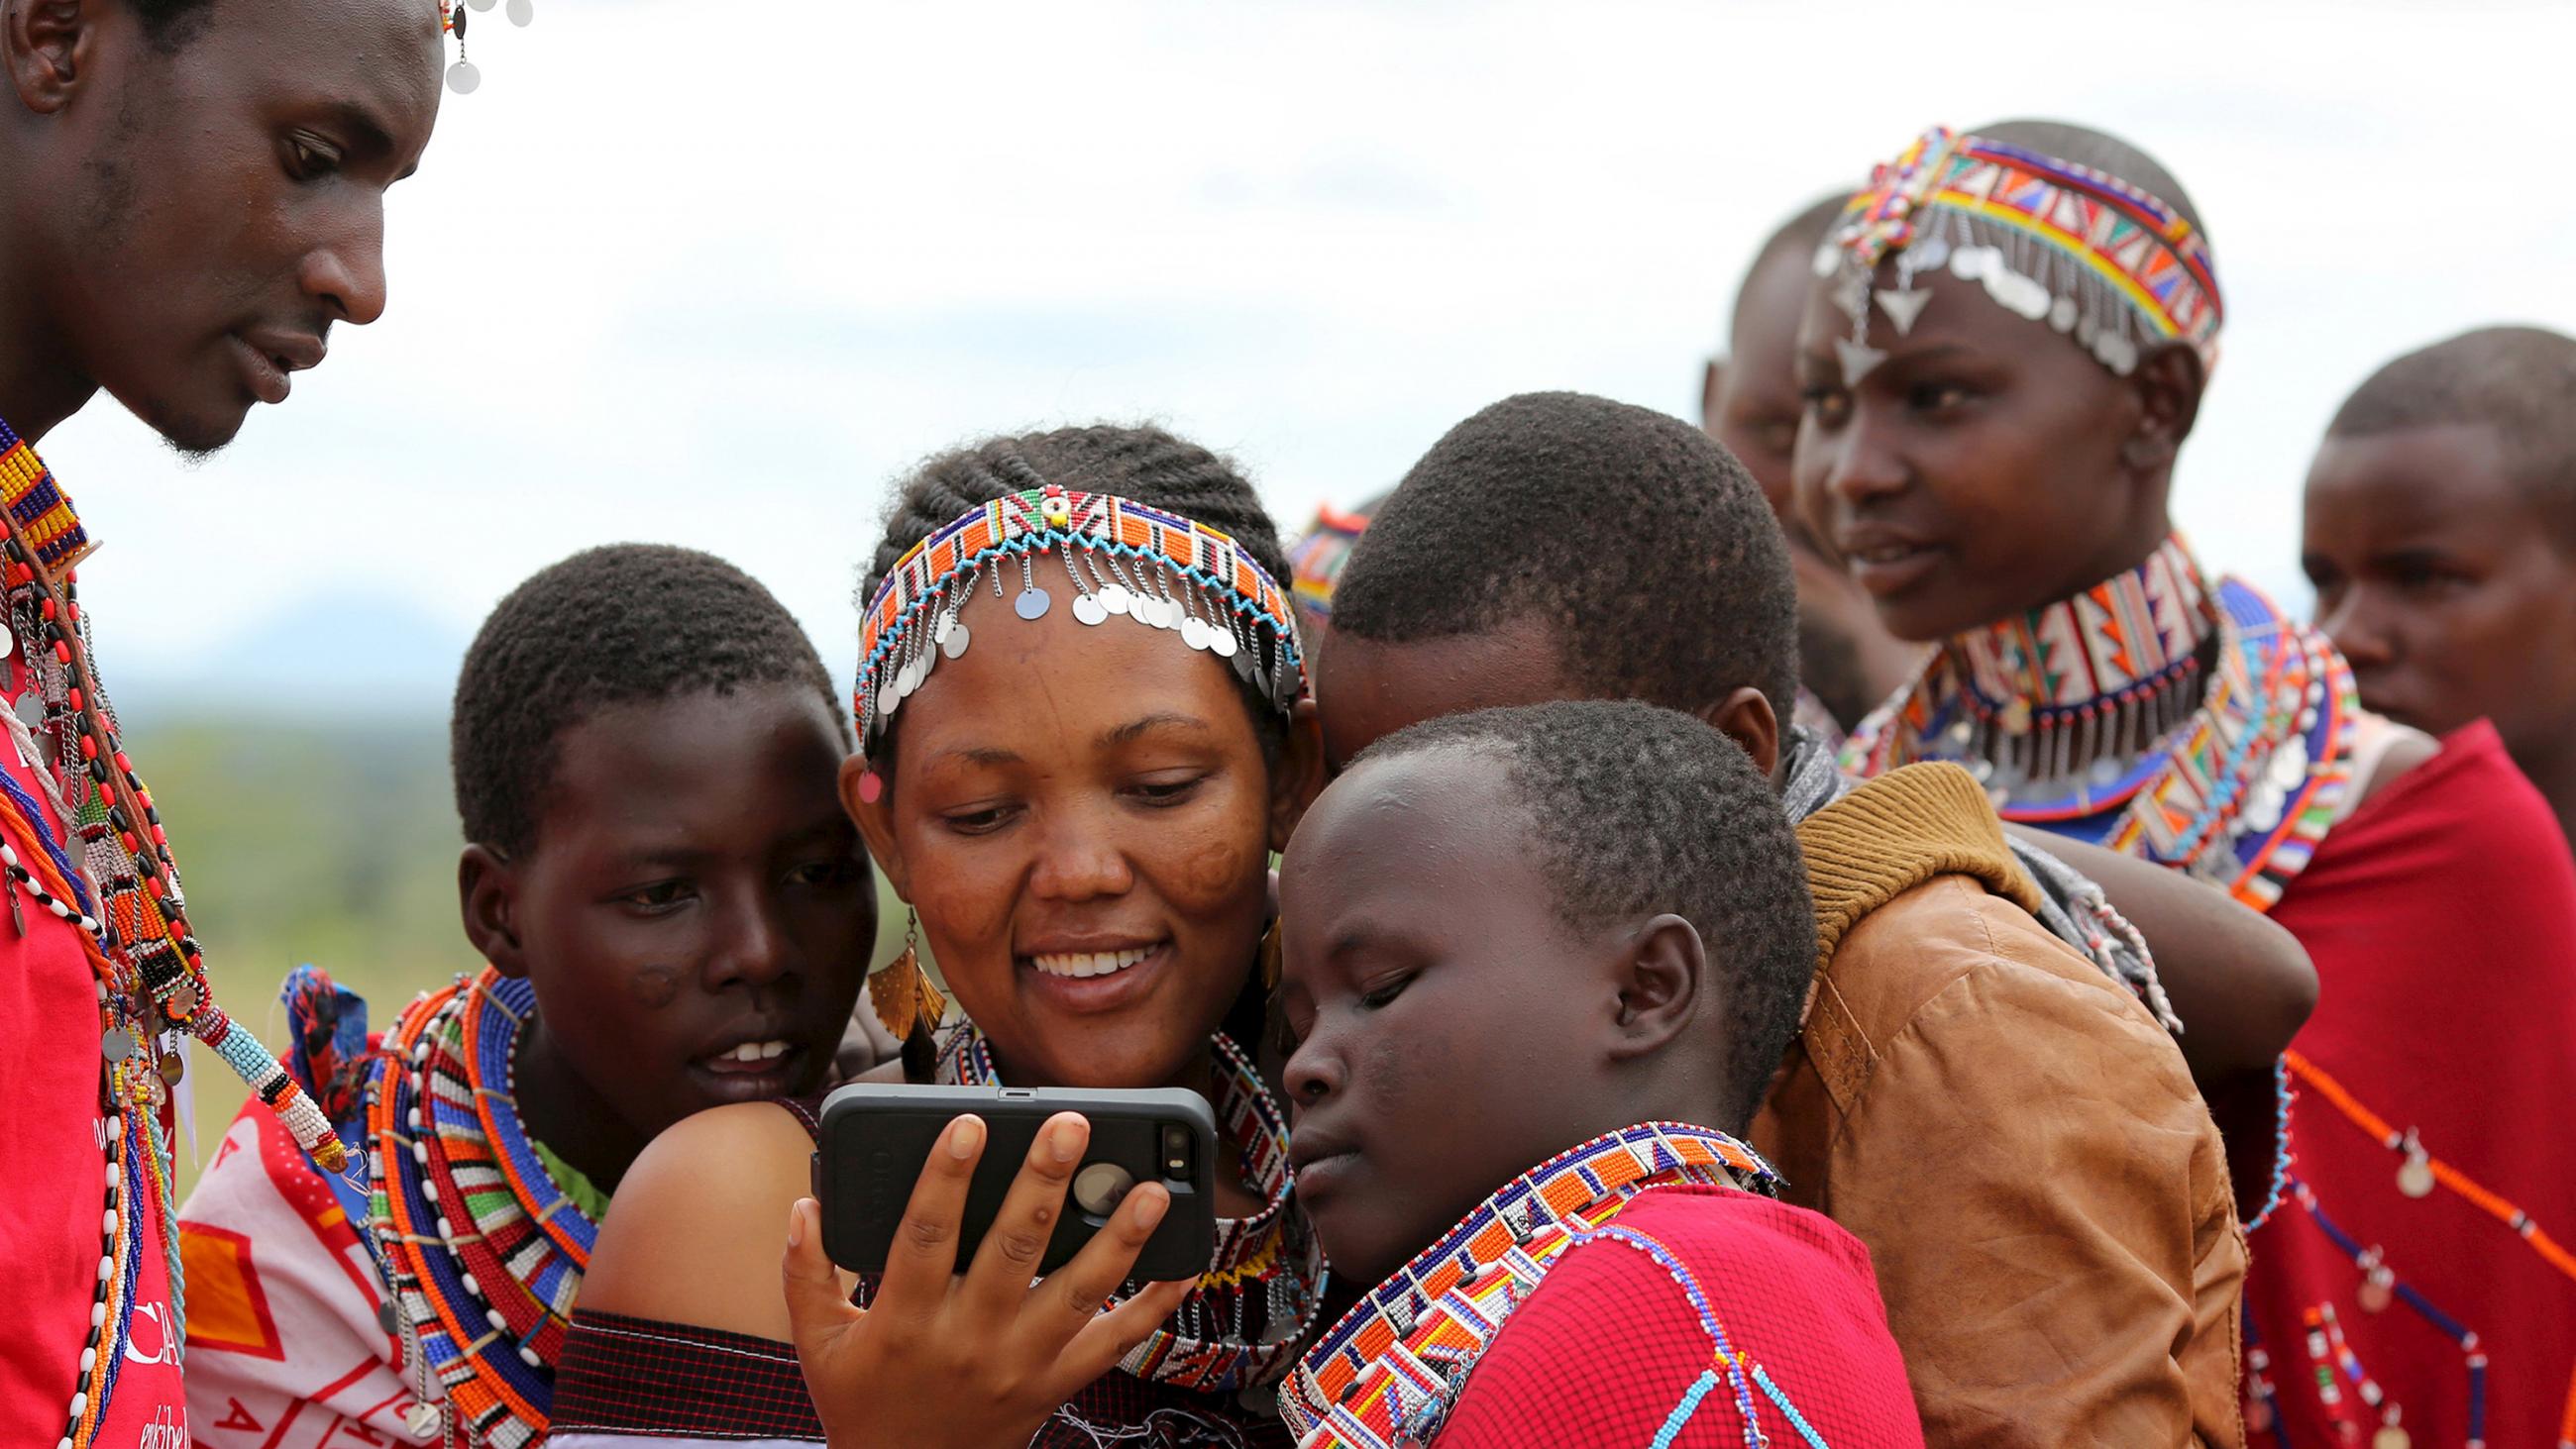 The images shows several girls crowded around a device while a young man looks on. 